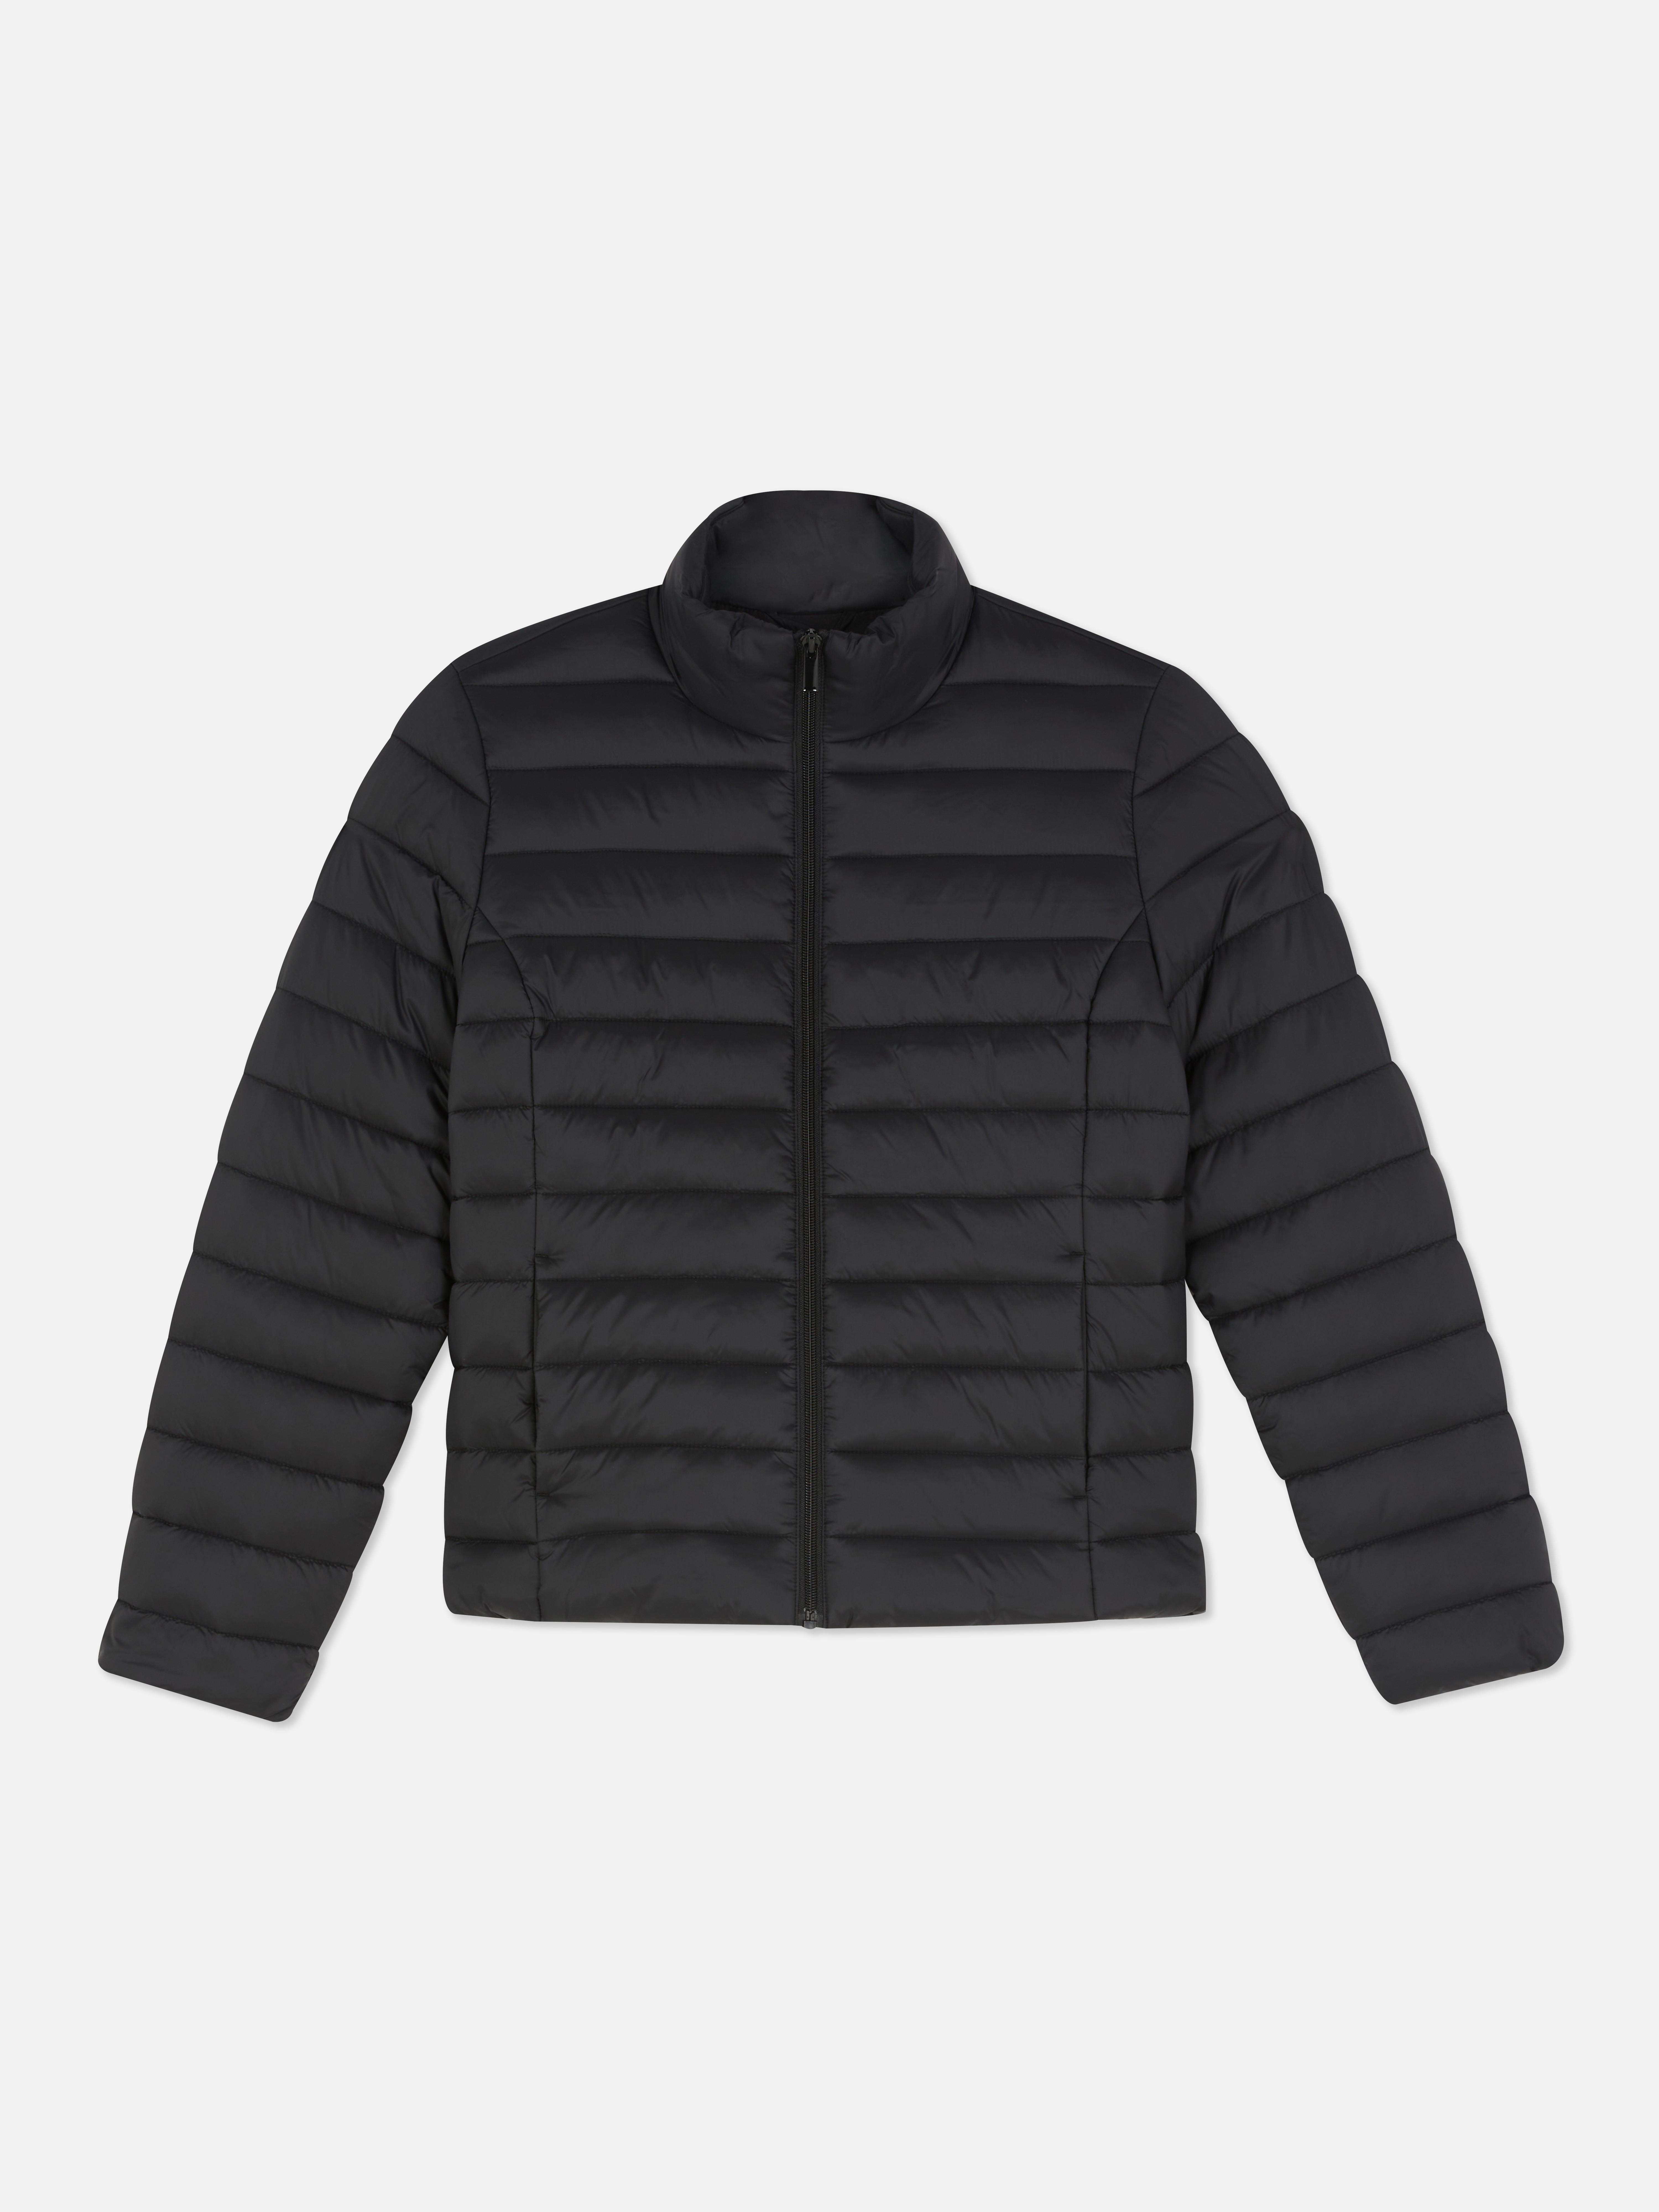 Padded Puffer Jacket | Women's Jackets & Coats | Women's Style | Our ...